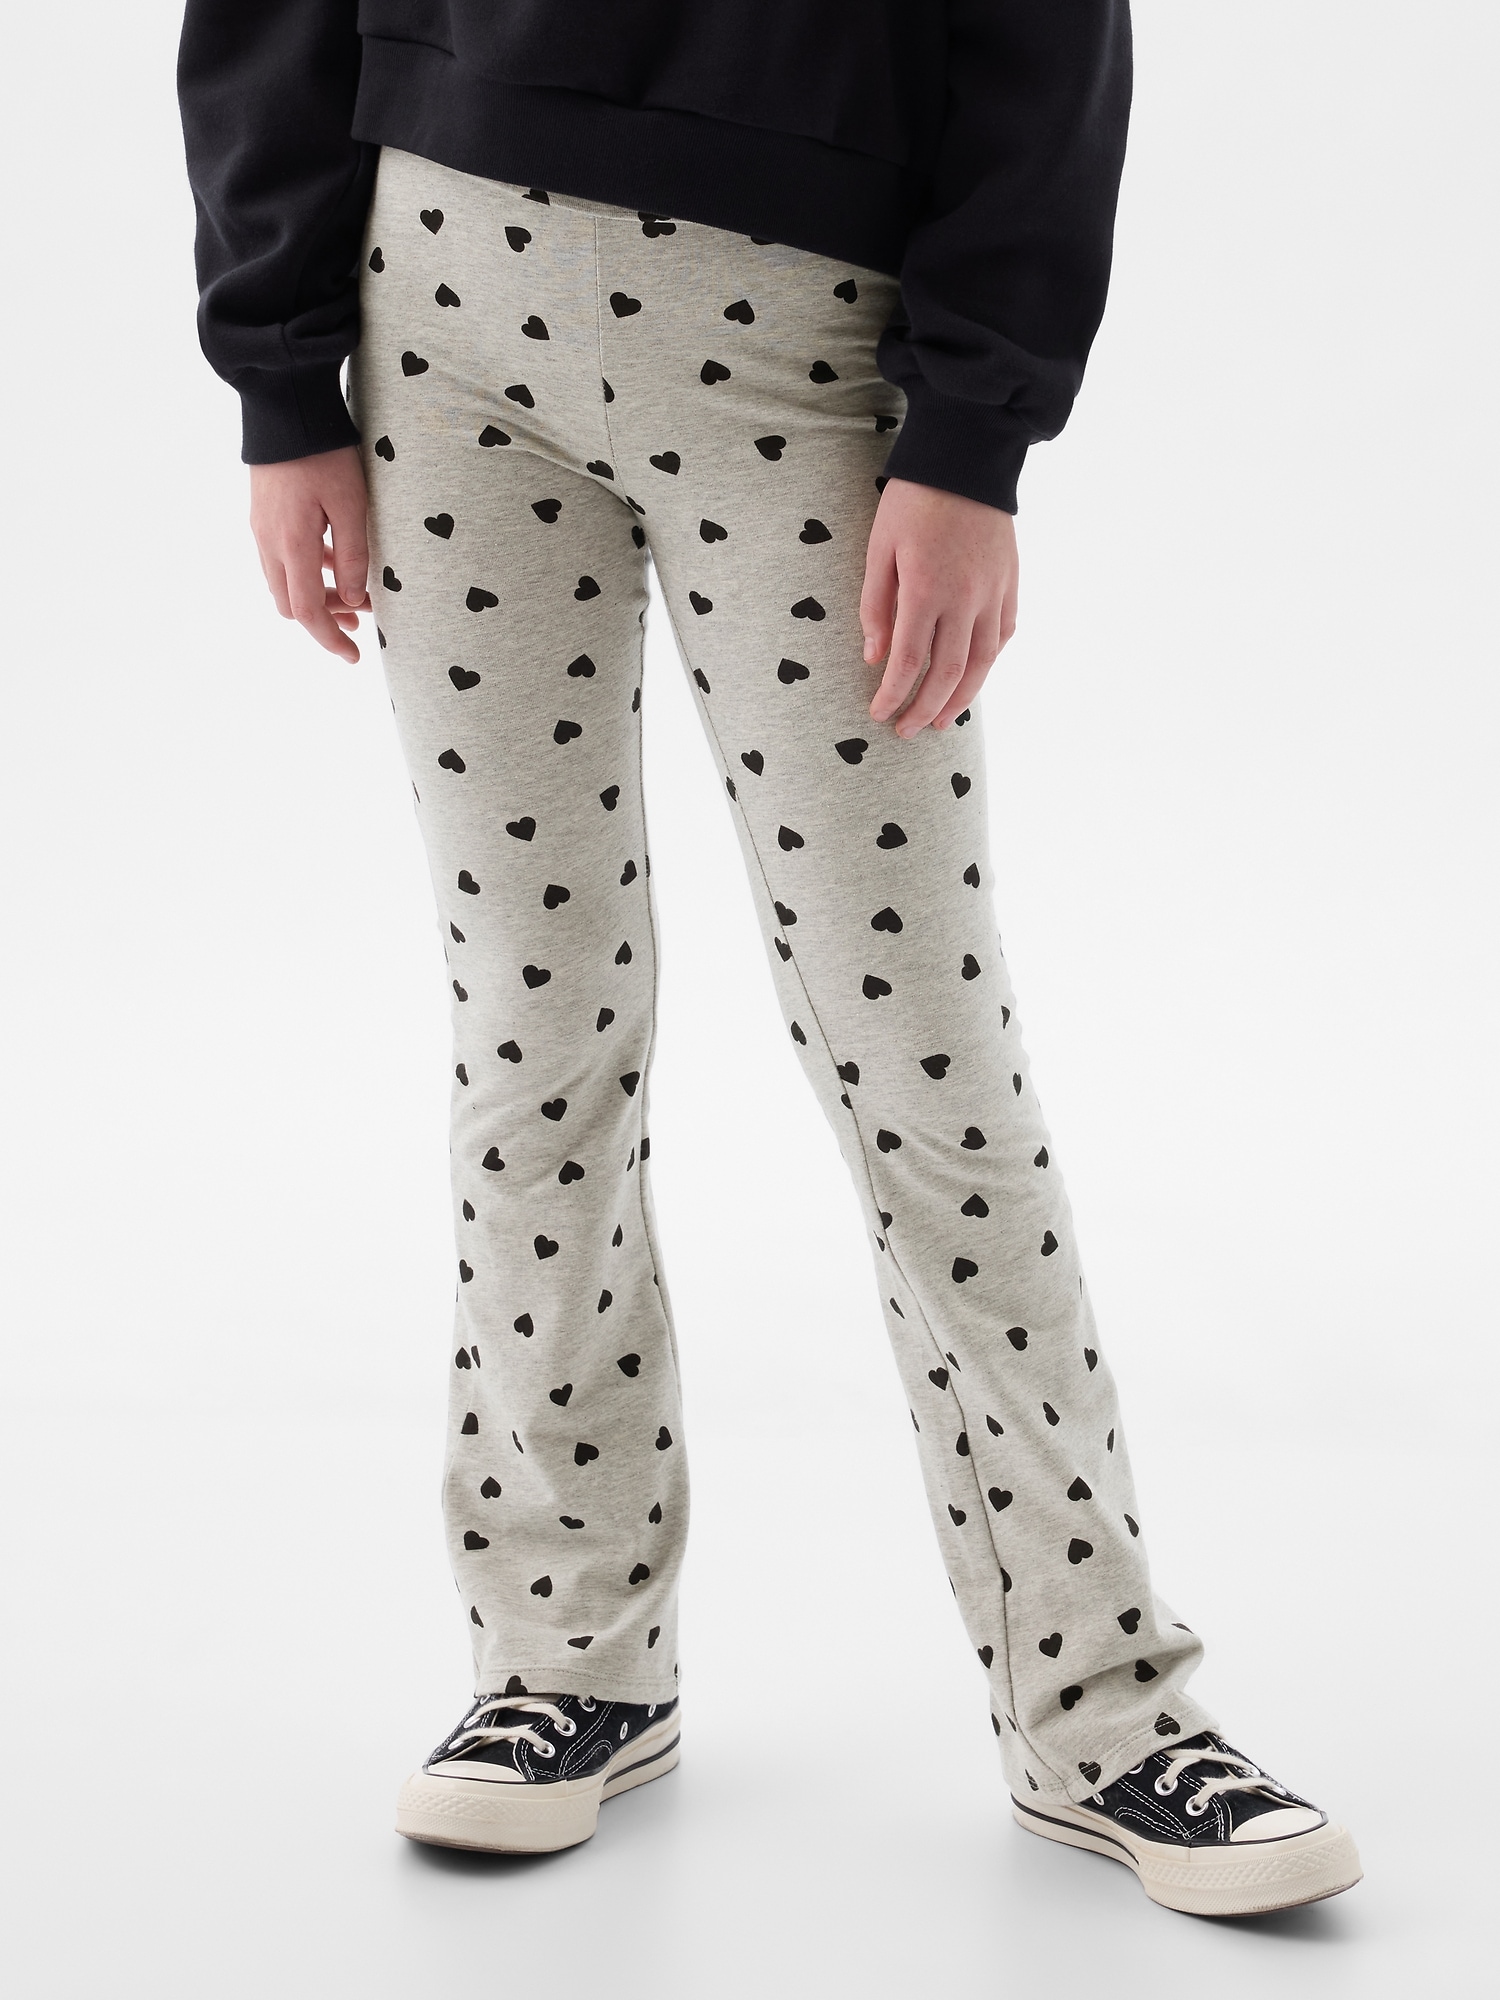 Cotton:On active leggings with pocket in light polka dot